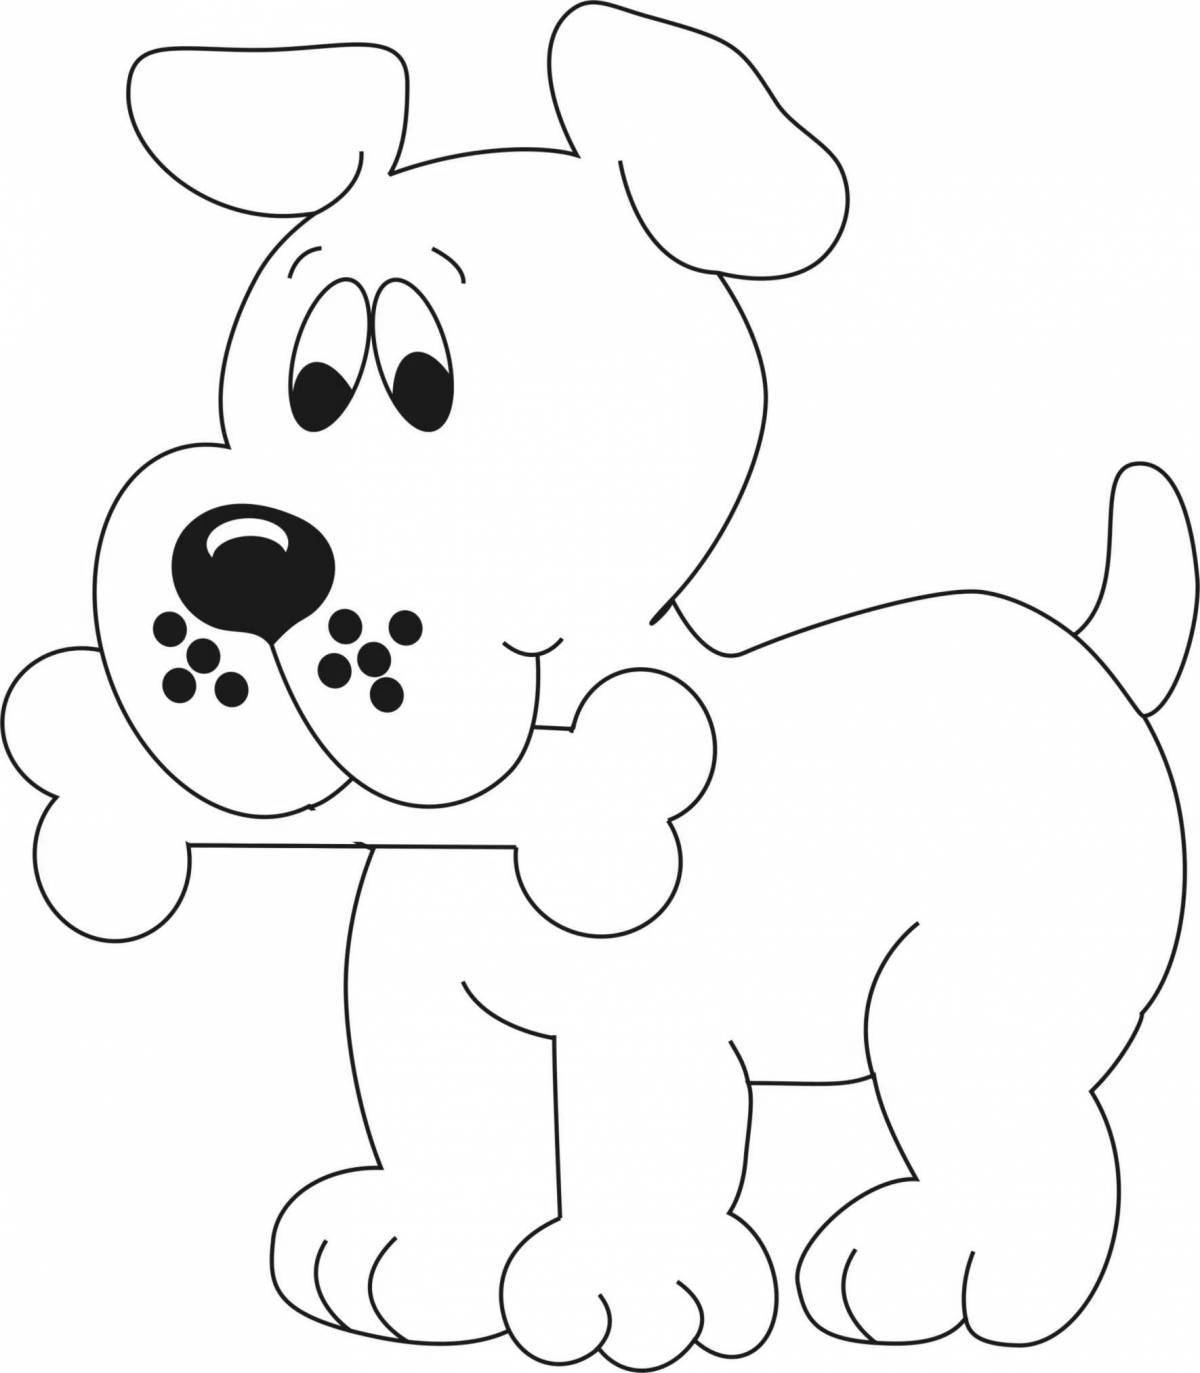 Snuggly coloring page dog for children